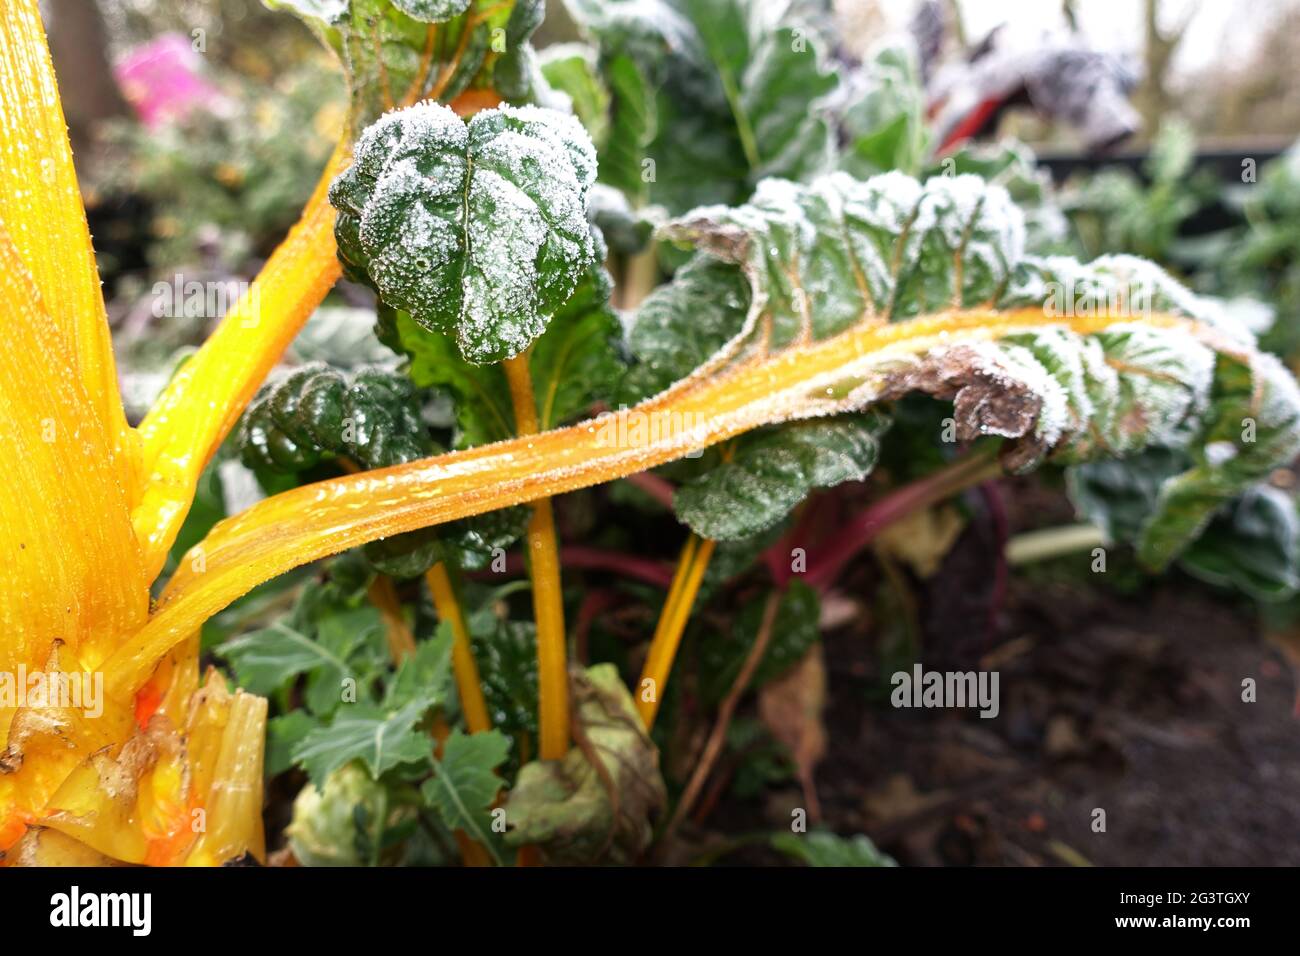 Rime on chard (Beta vulgaris) with colored stems Stock Photo